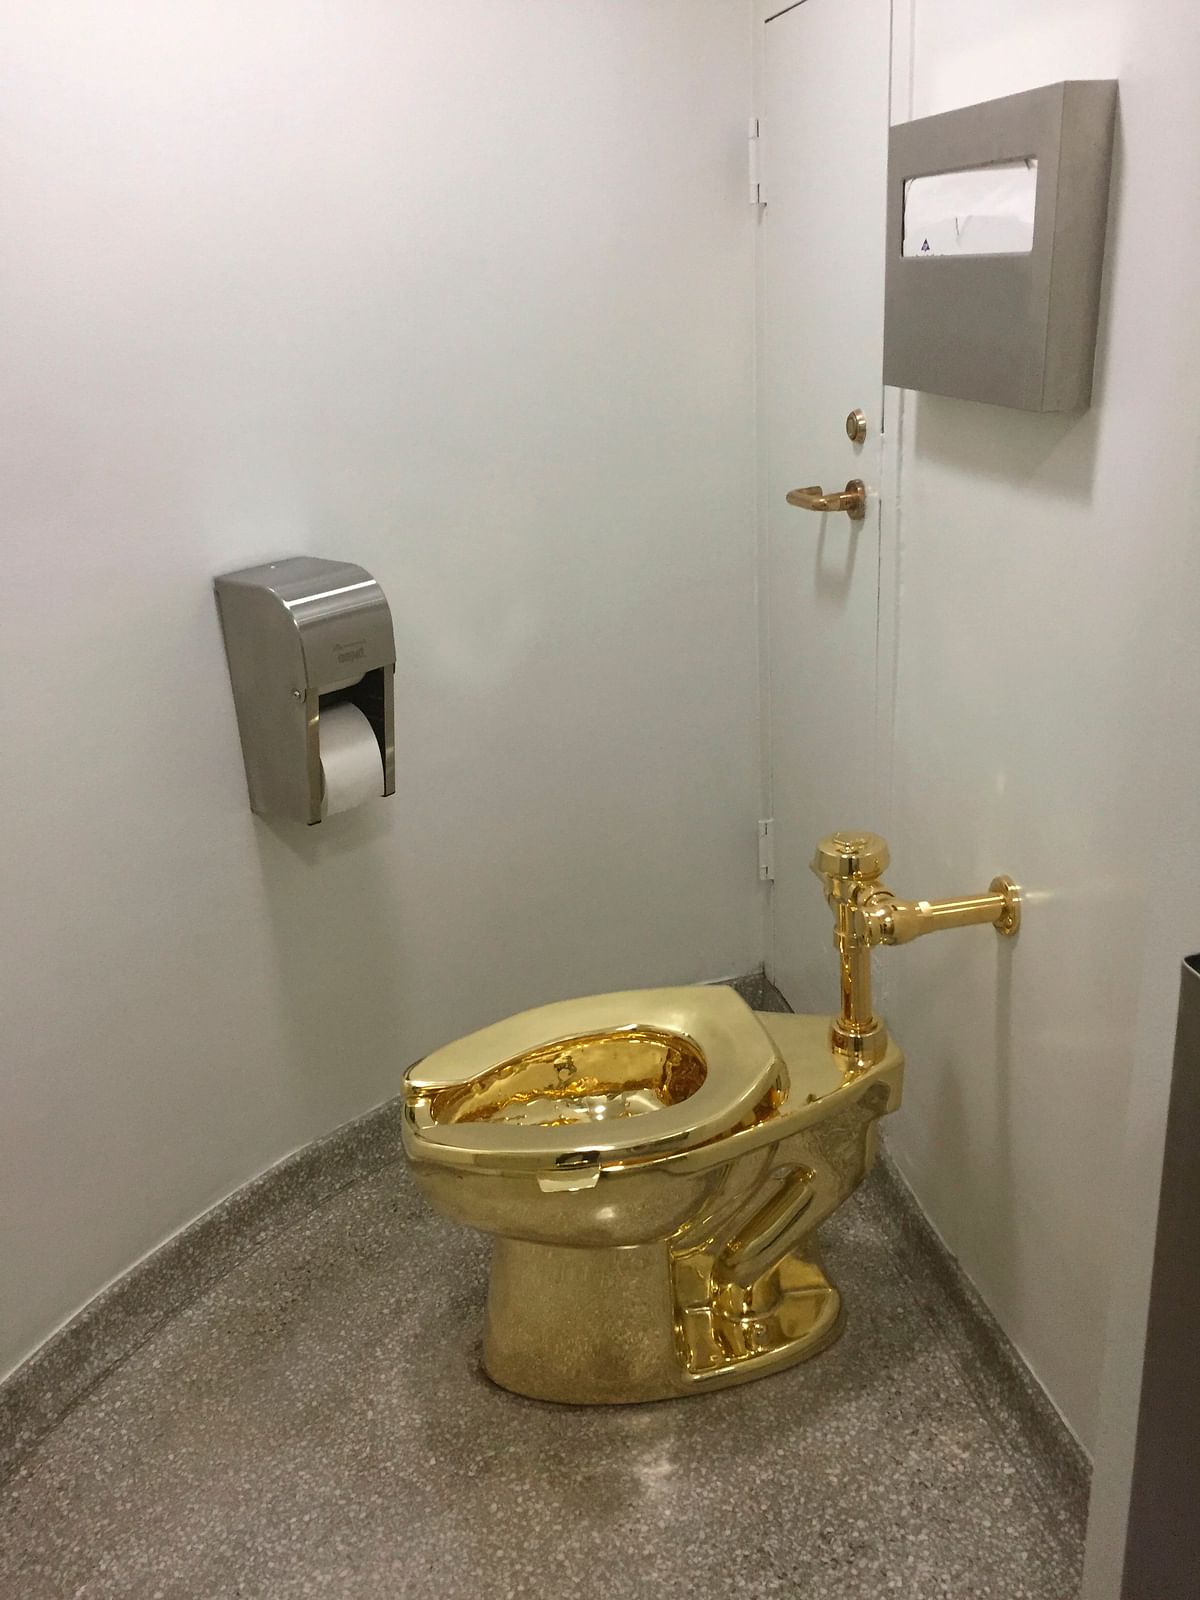 In this file photo taken on 15 September 2016, a fully functioning solid gold toilet, made by Italian artist Maurizio Cattelan, is going into public use at the Guggenheim Museum in New York. Photo: AFP